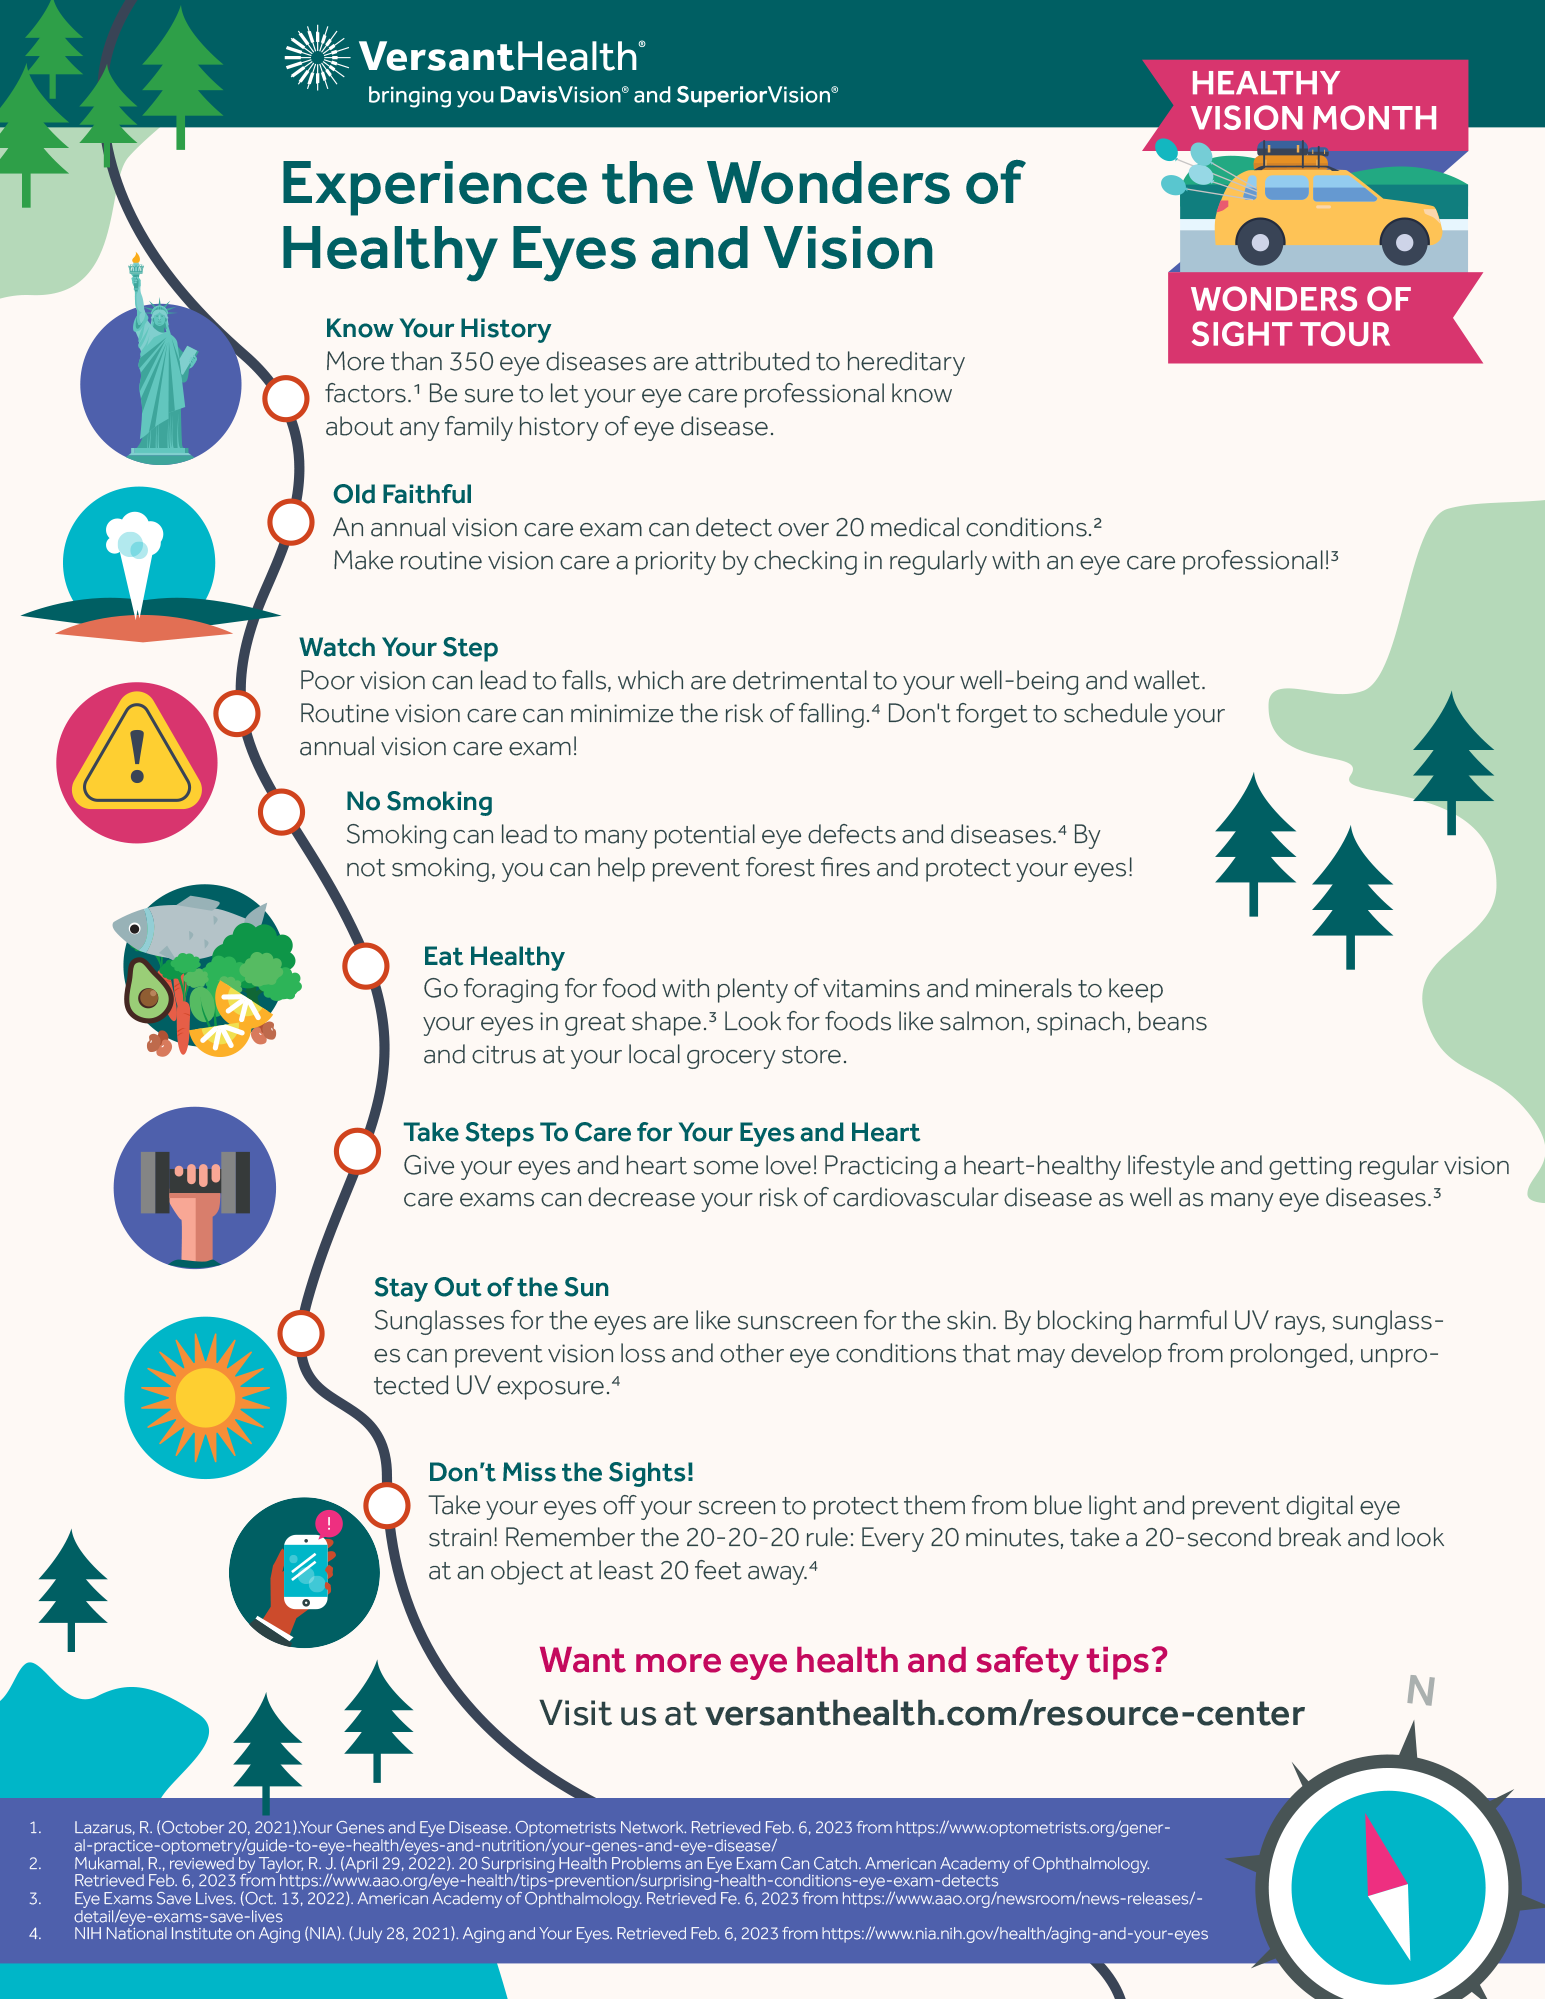 Experience the wonders of healthy eyes and vision infographic